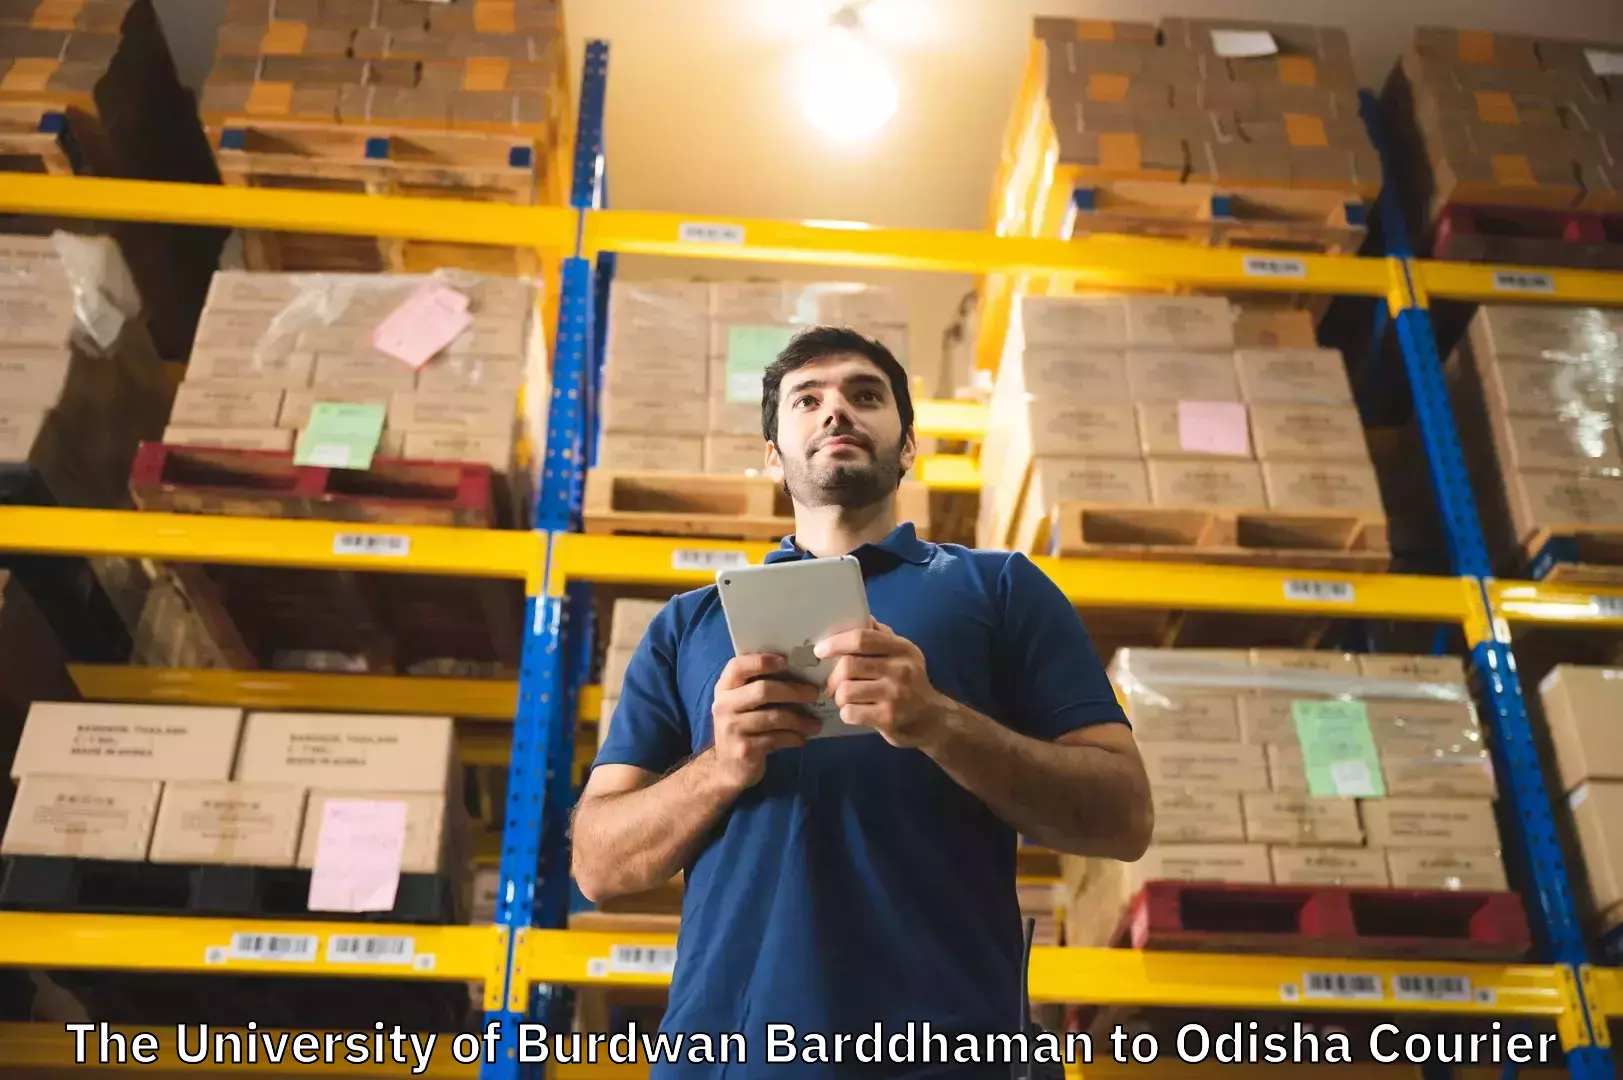 Luggage forwarding service in The University of Burdwan Barddhaman to Chandipur